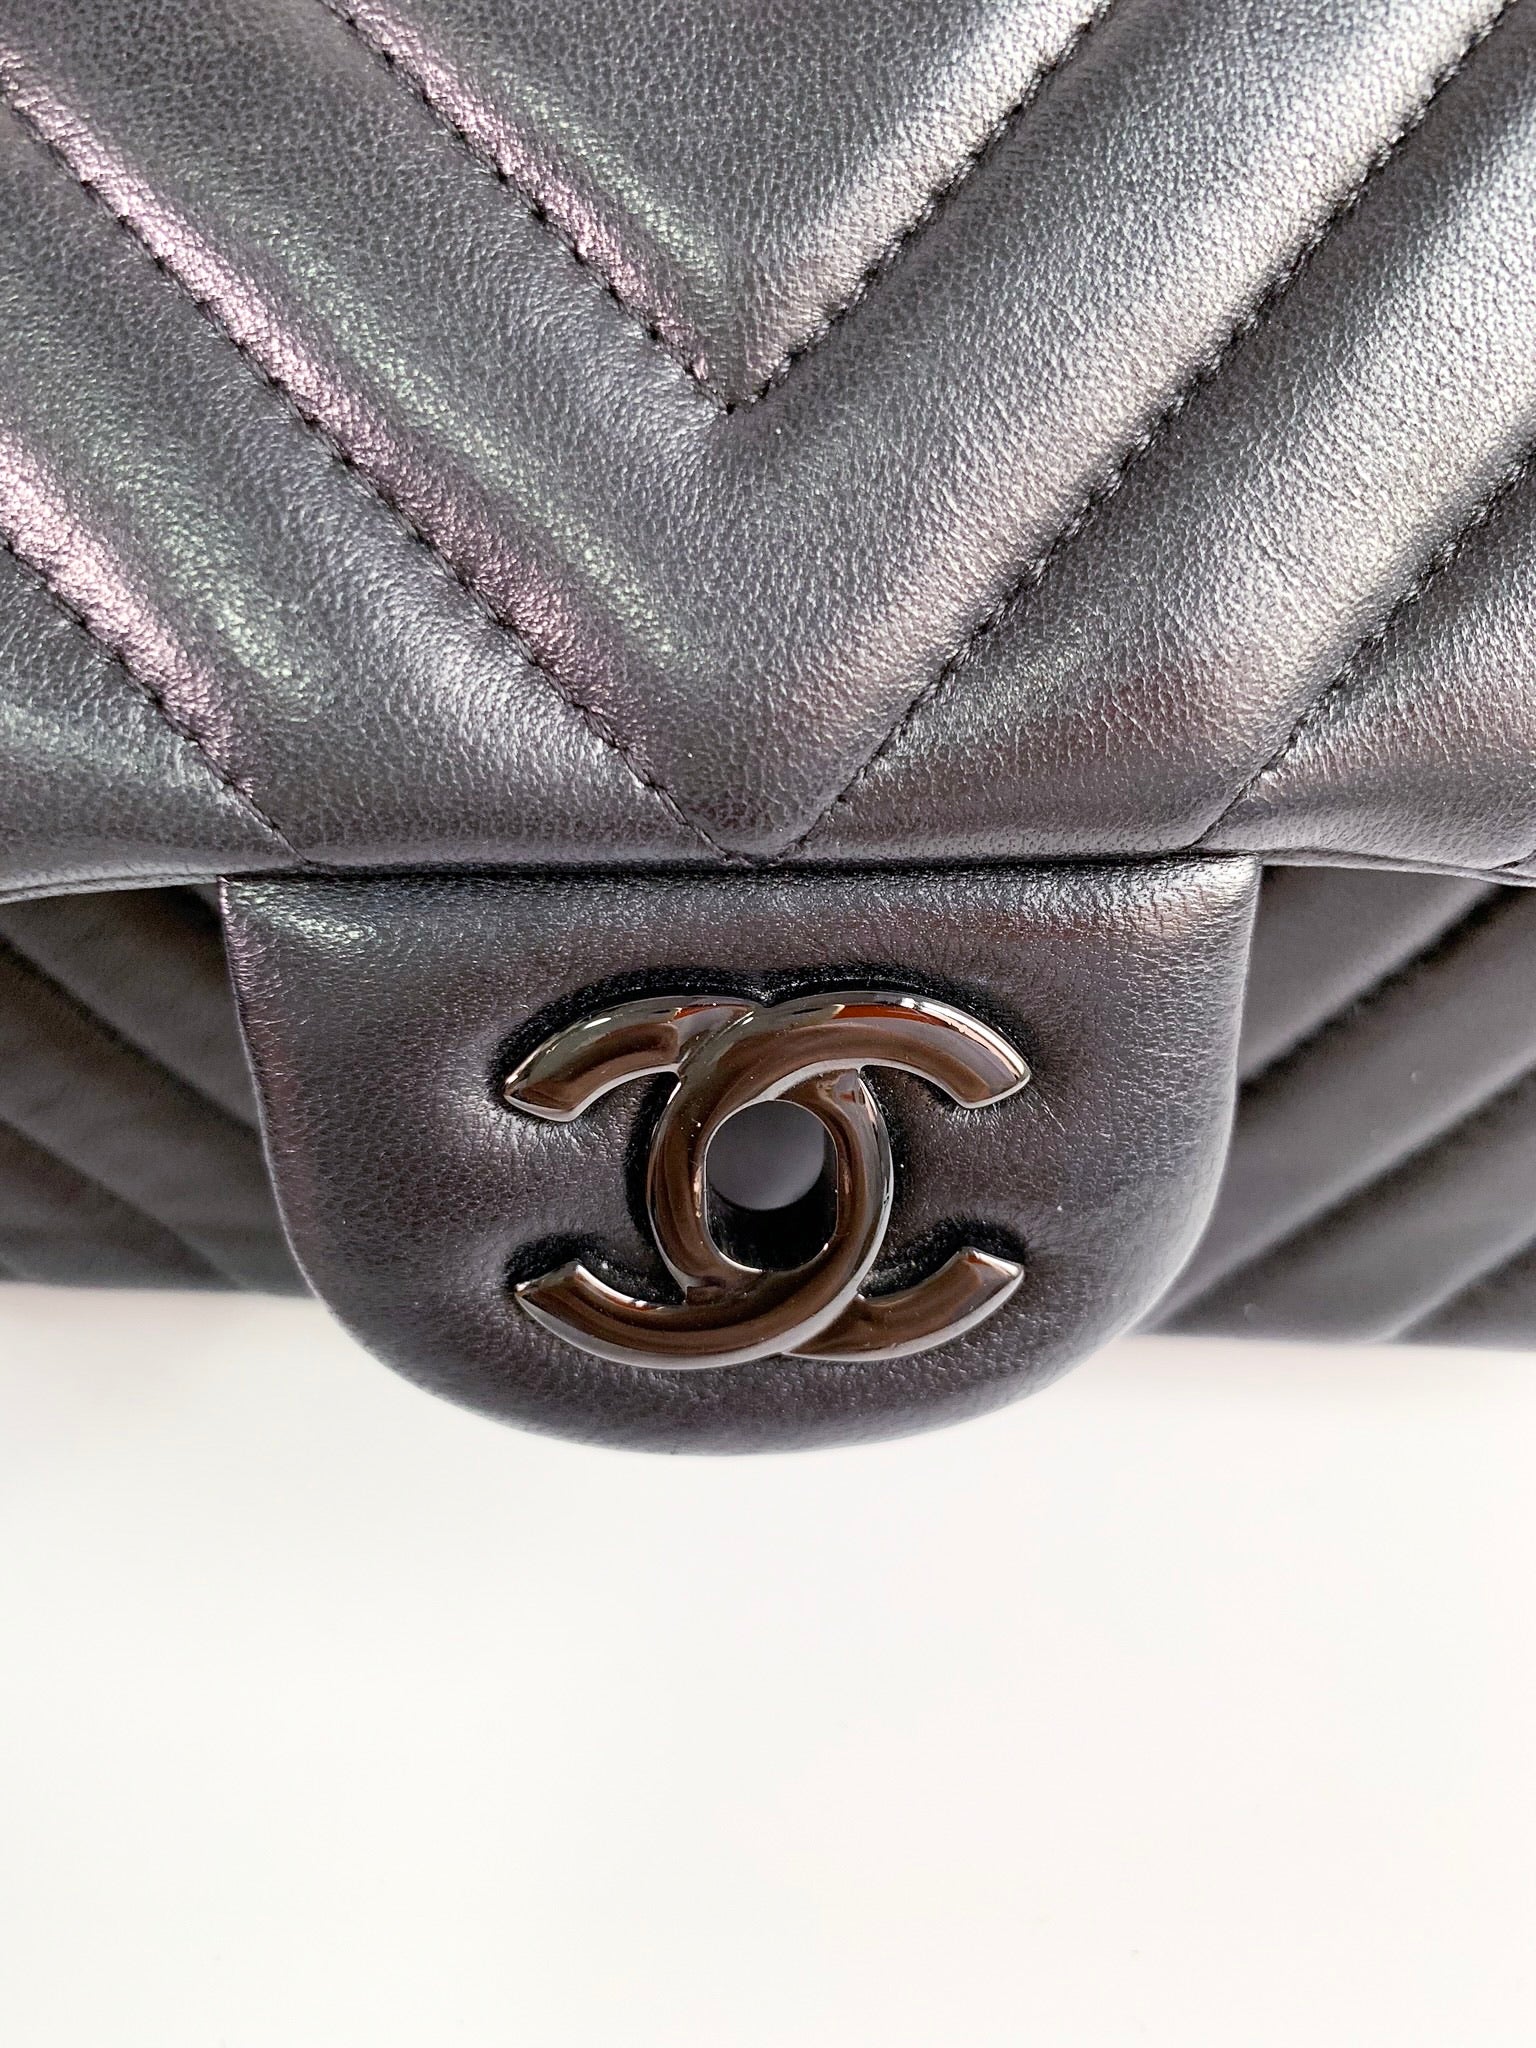 Chanel Lambskin Chevron Quilted Mini Rectangular Flap So Black – Coco  Approved Studio